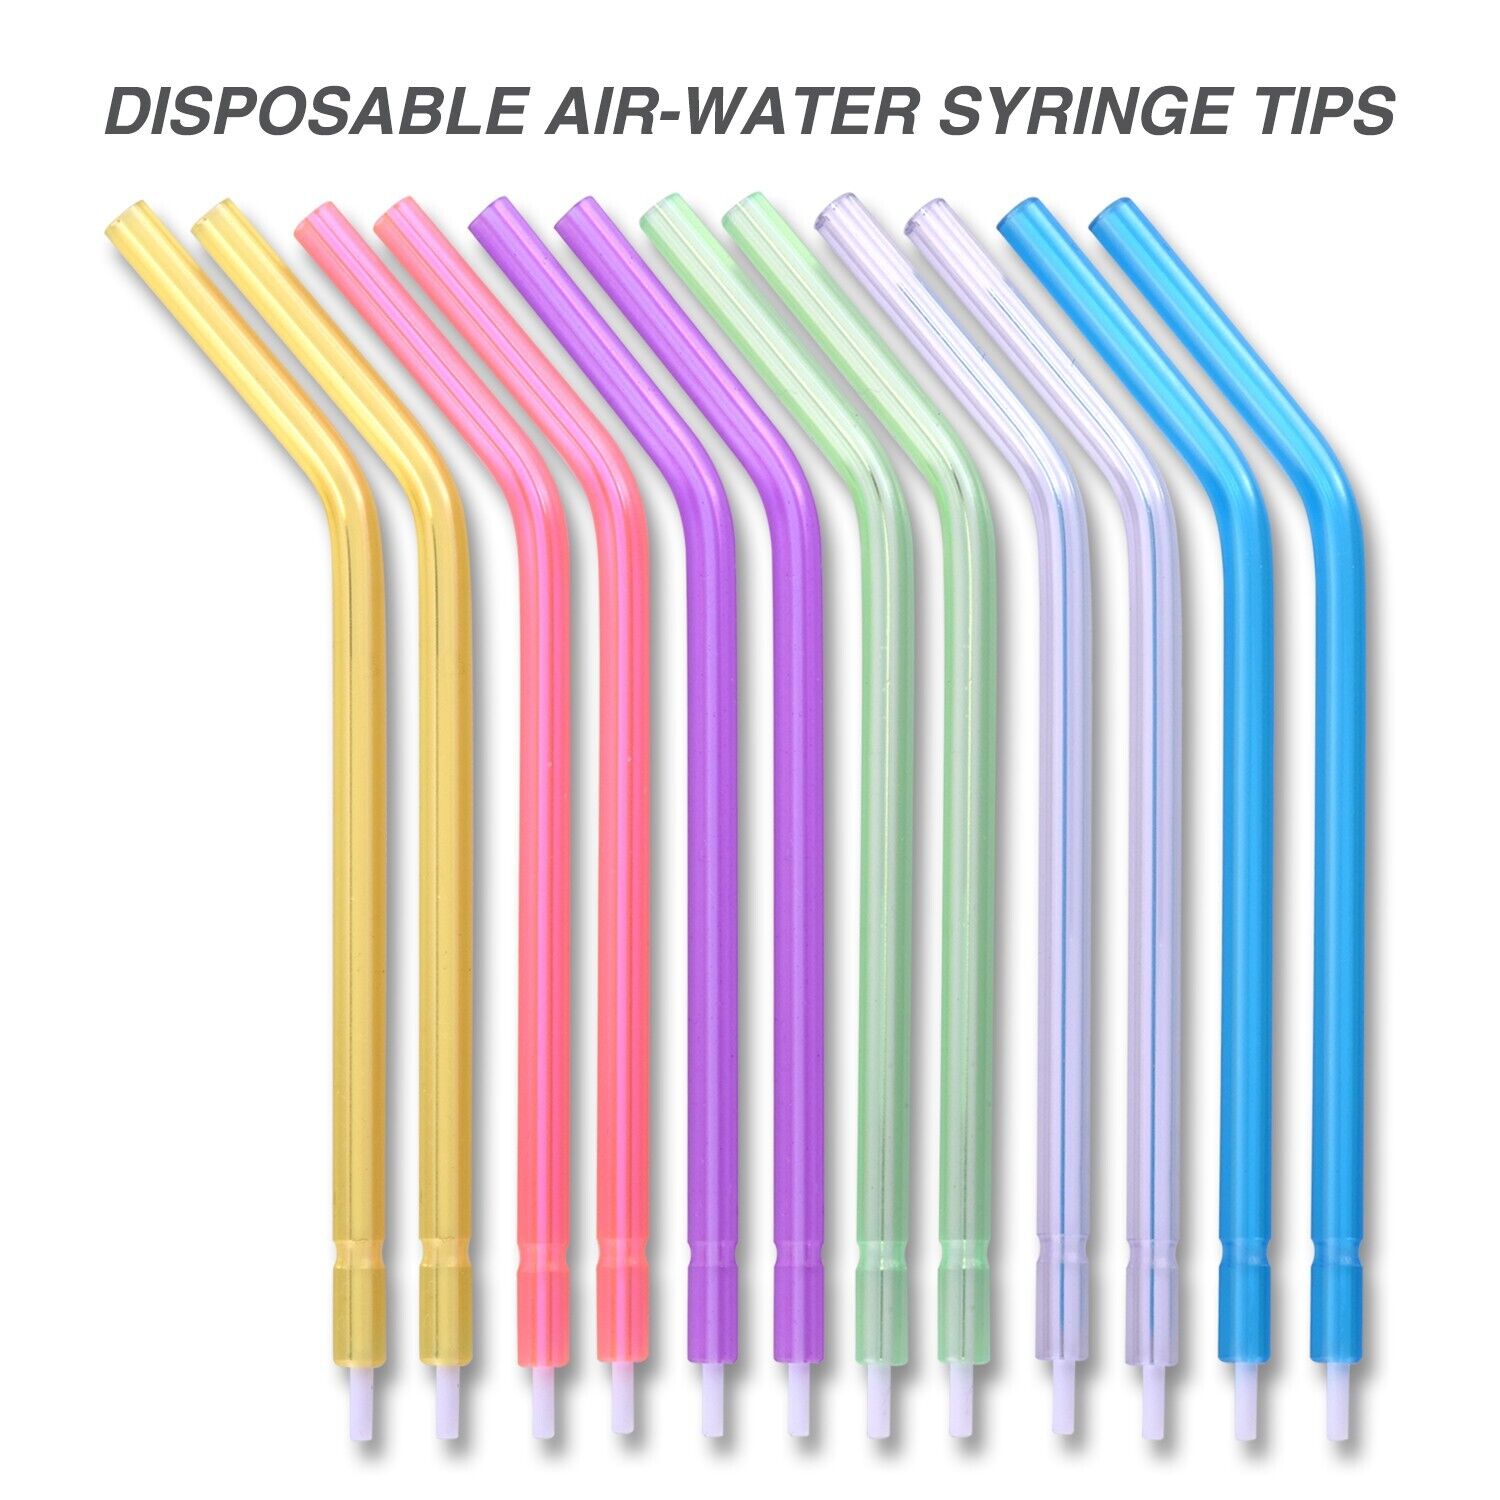 1500 Dental Disposable Air Water Syringe Tips, Rainbow Variety, (6 Bags of 250)